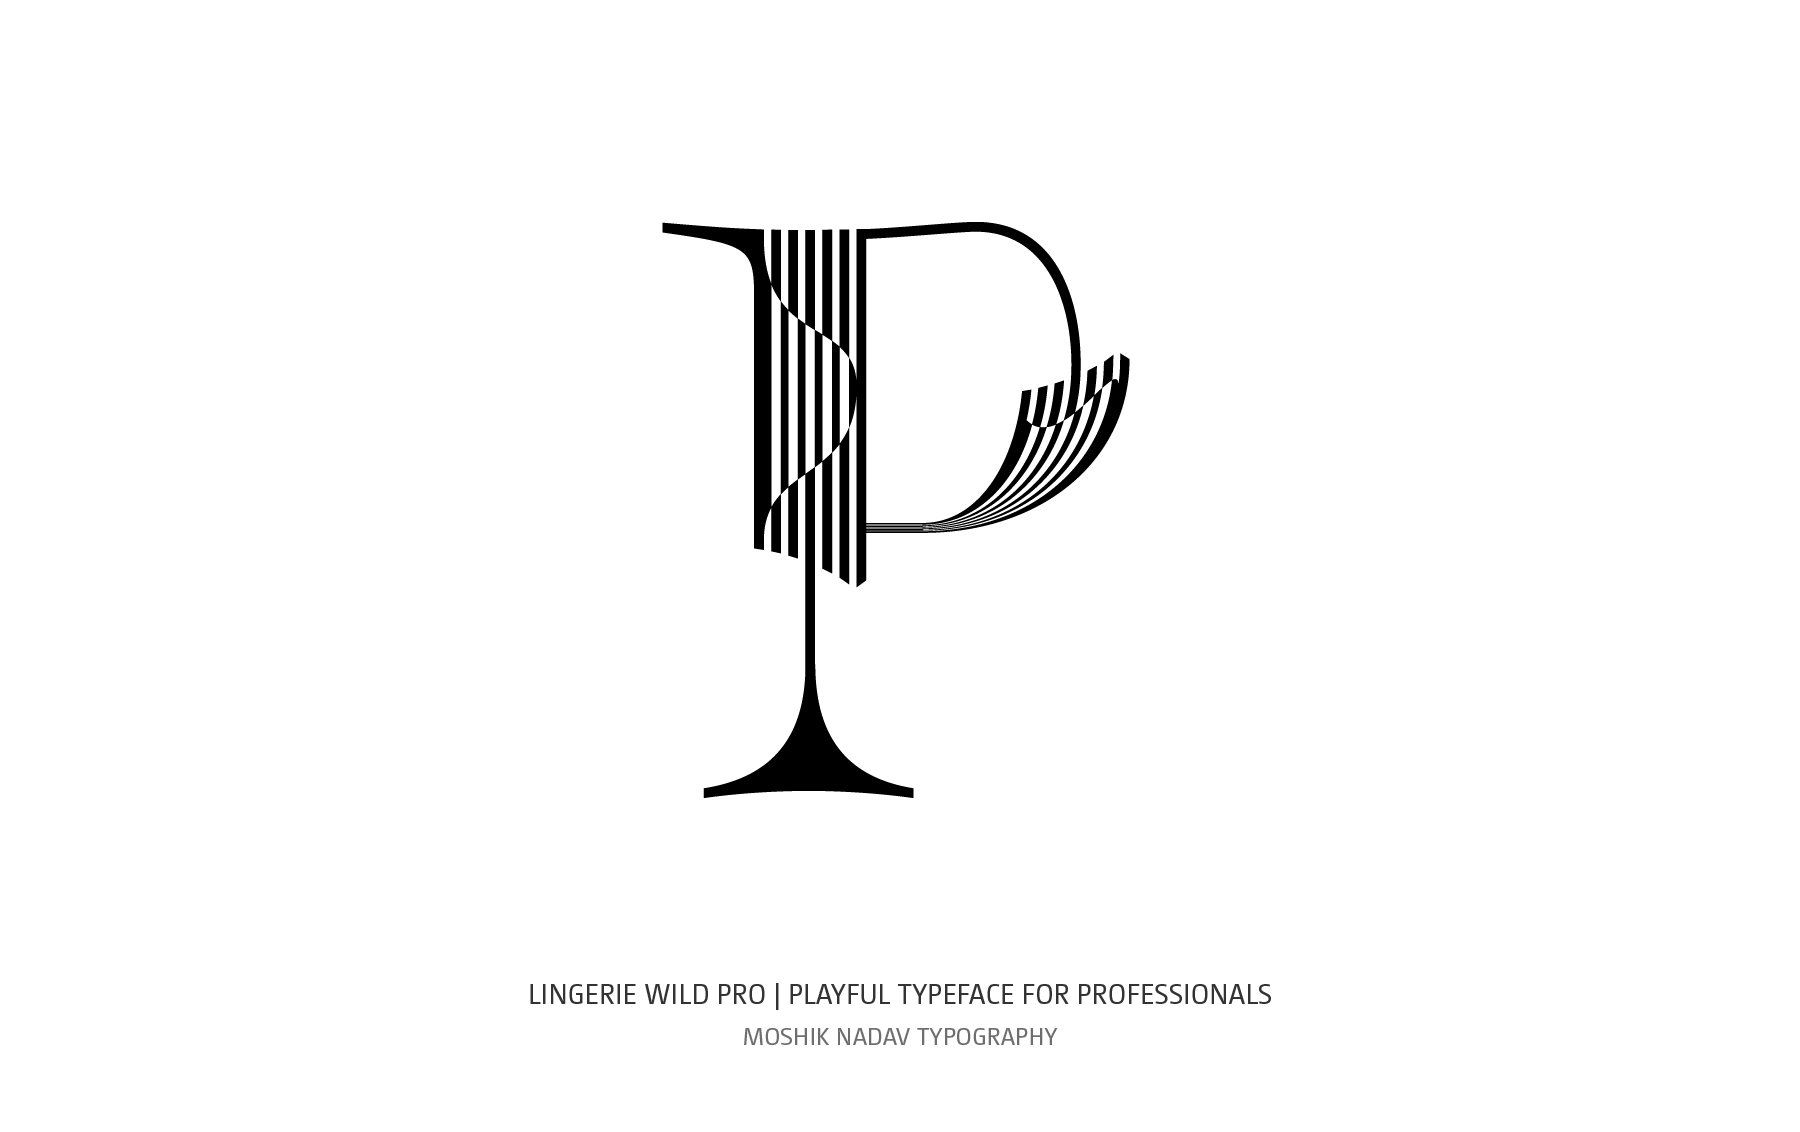 Sexy uppercase P design for cool logos and luxury brands by Moshik Nadav Typography